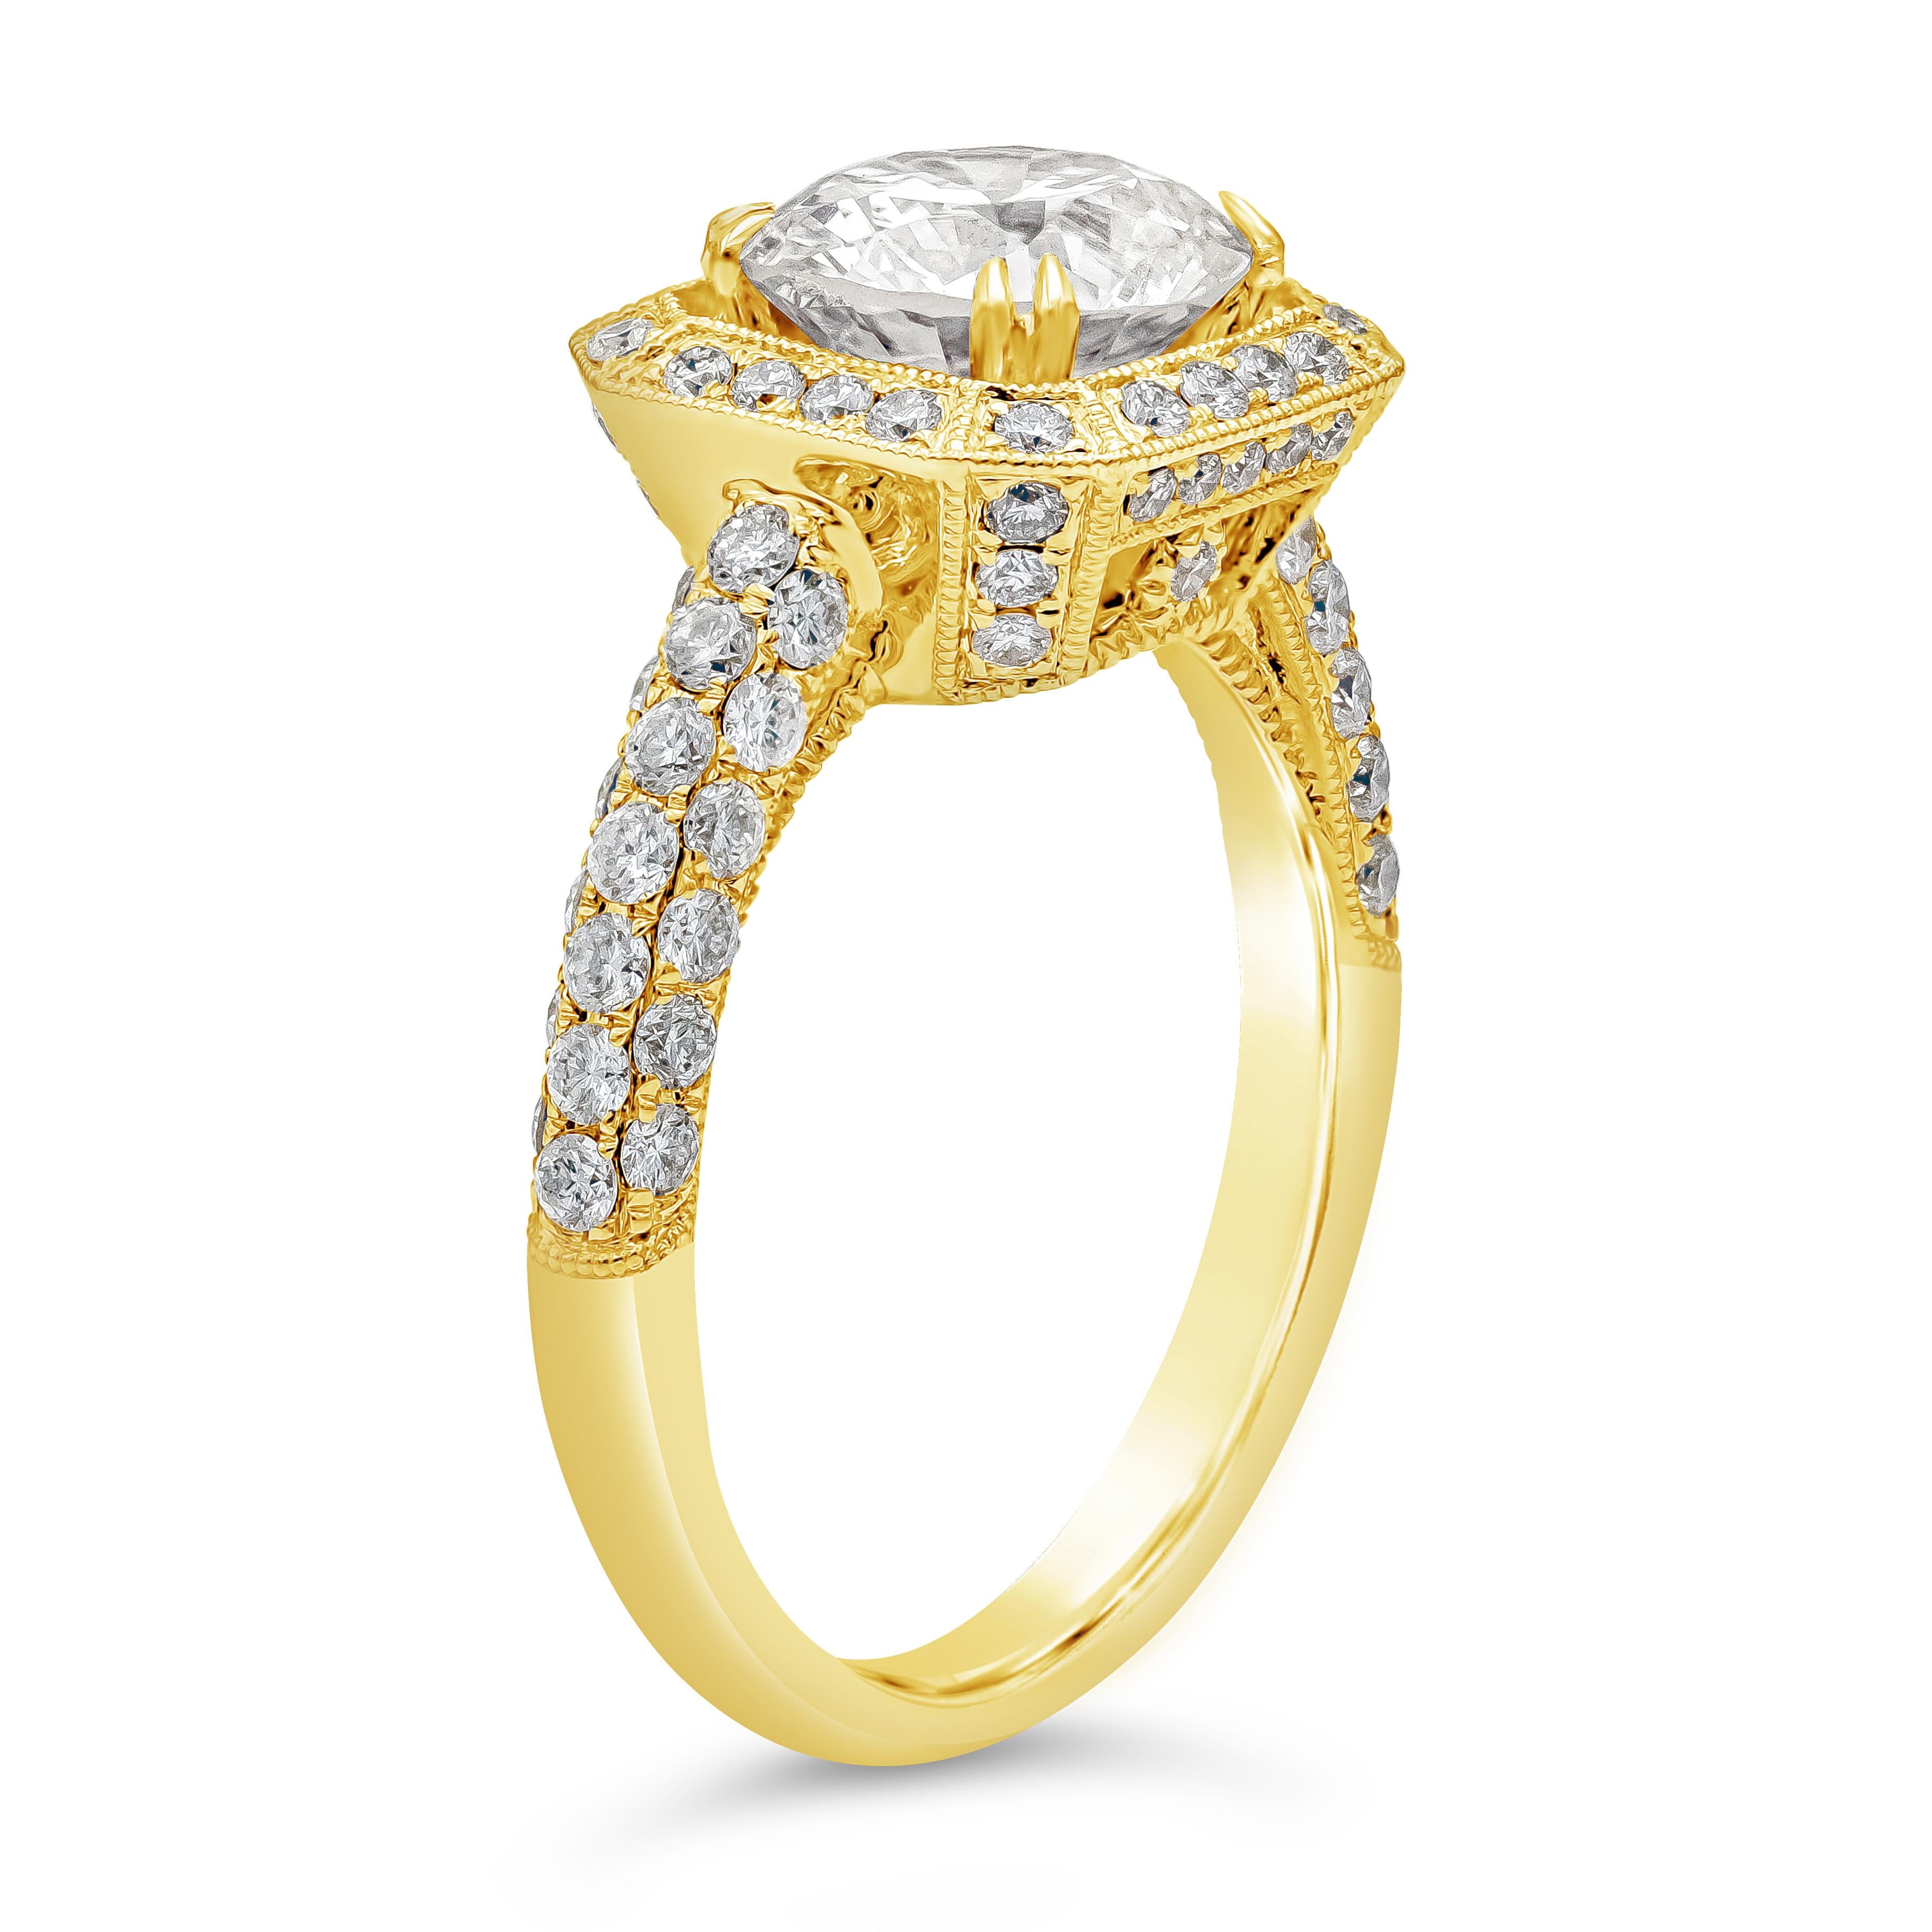 This gorgeous ring has a beautiful unique design set with a 1.99 carats brilliant round diamond certified by GIA as M color and VS2 in clarity. Surrounded by a single row of brilliant round diamonds that continue to the shank of the ring weighing